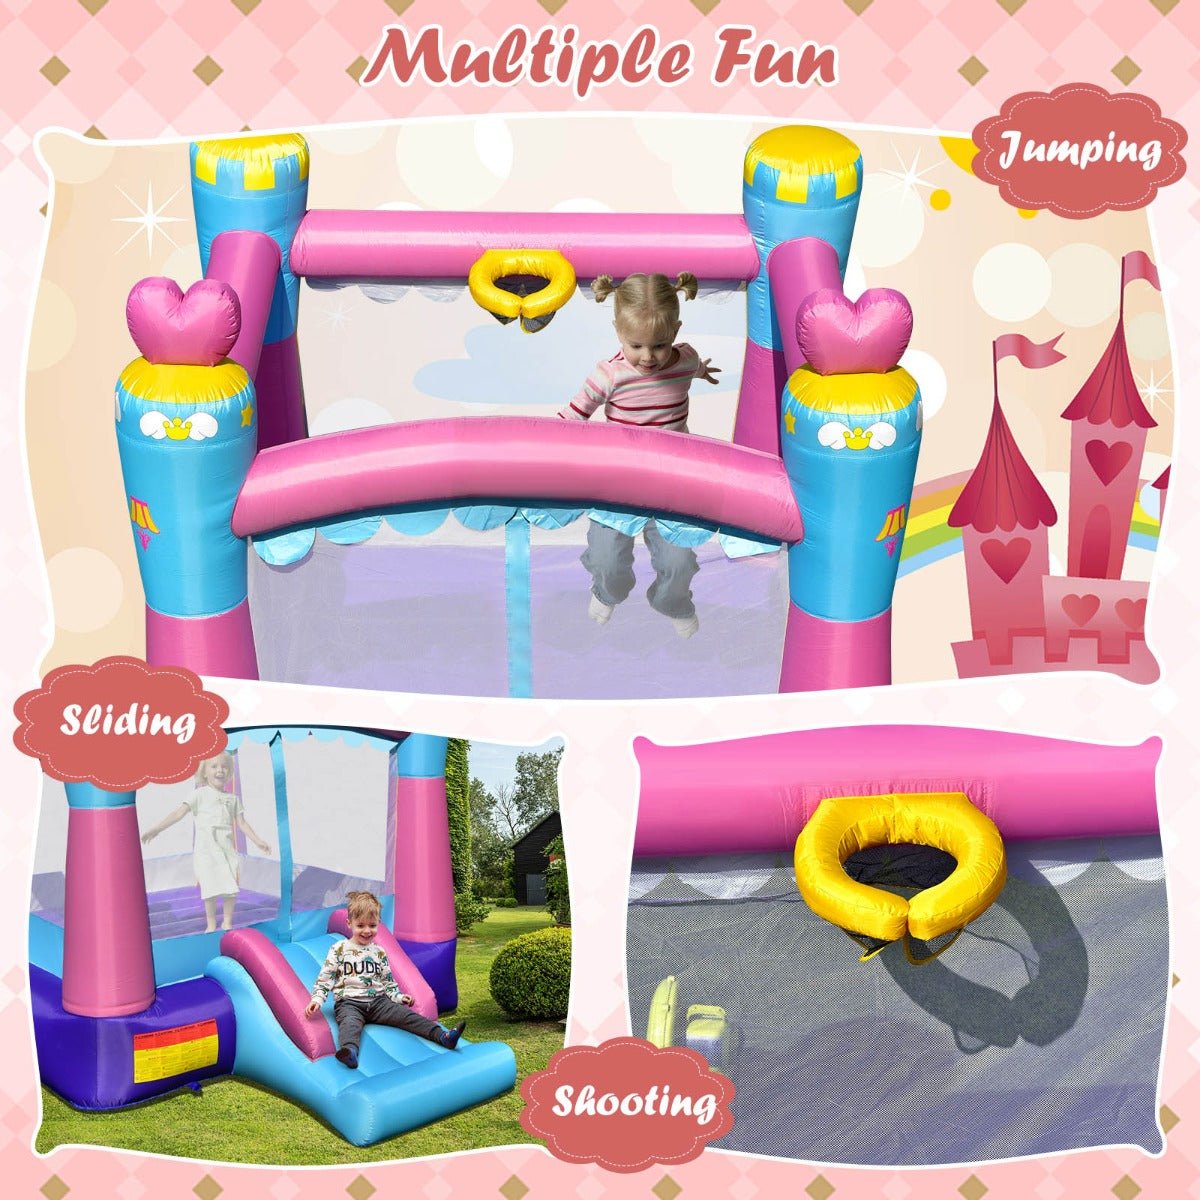 Princess Theme Jumping Castle - Active Play and Royal Fun for Kids